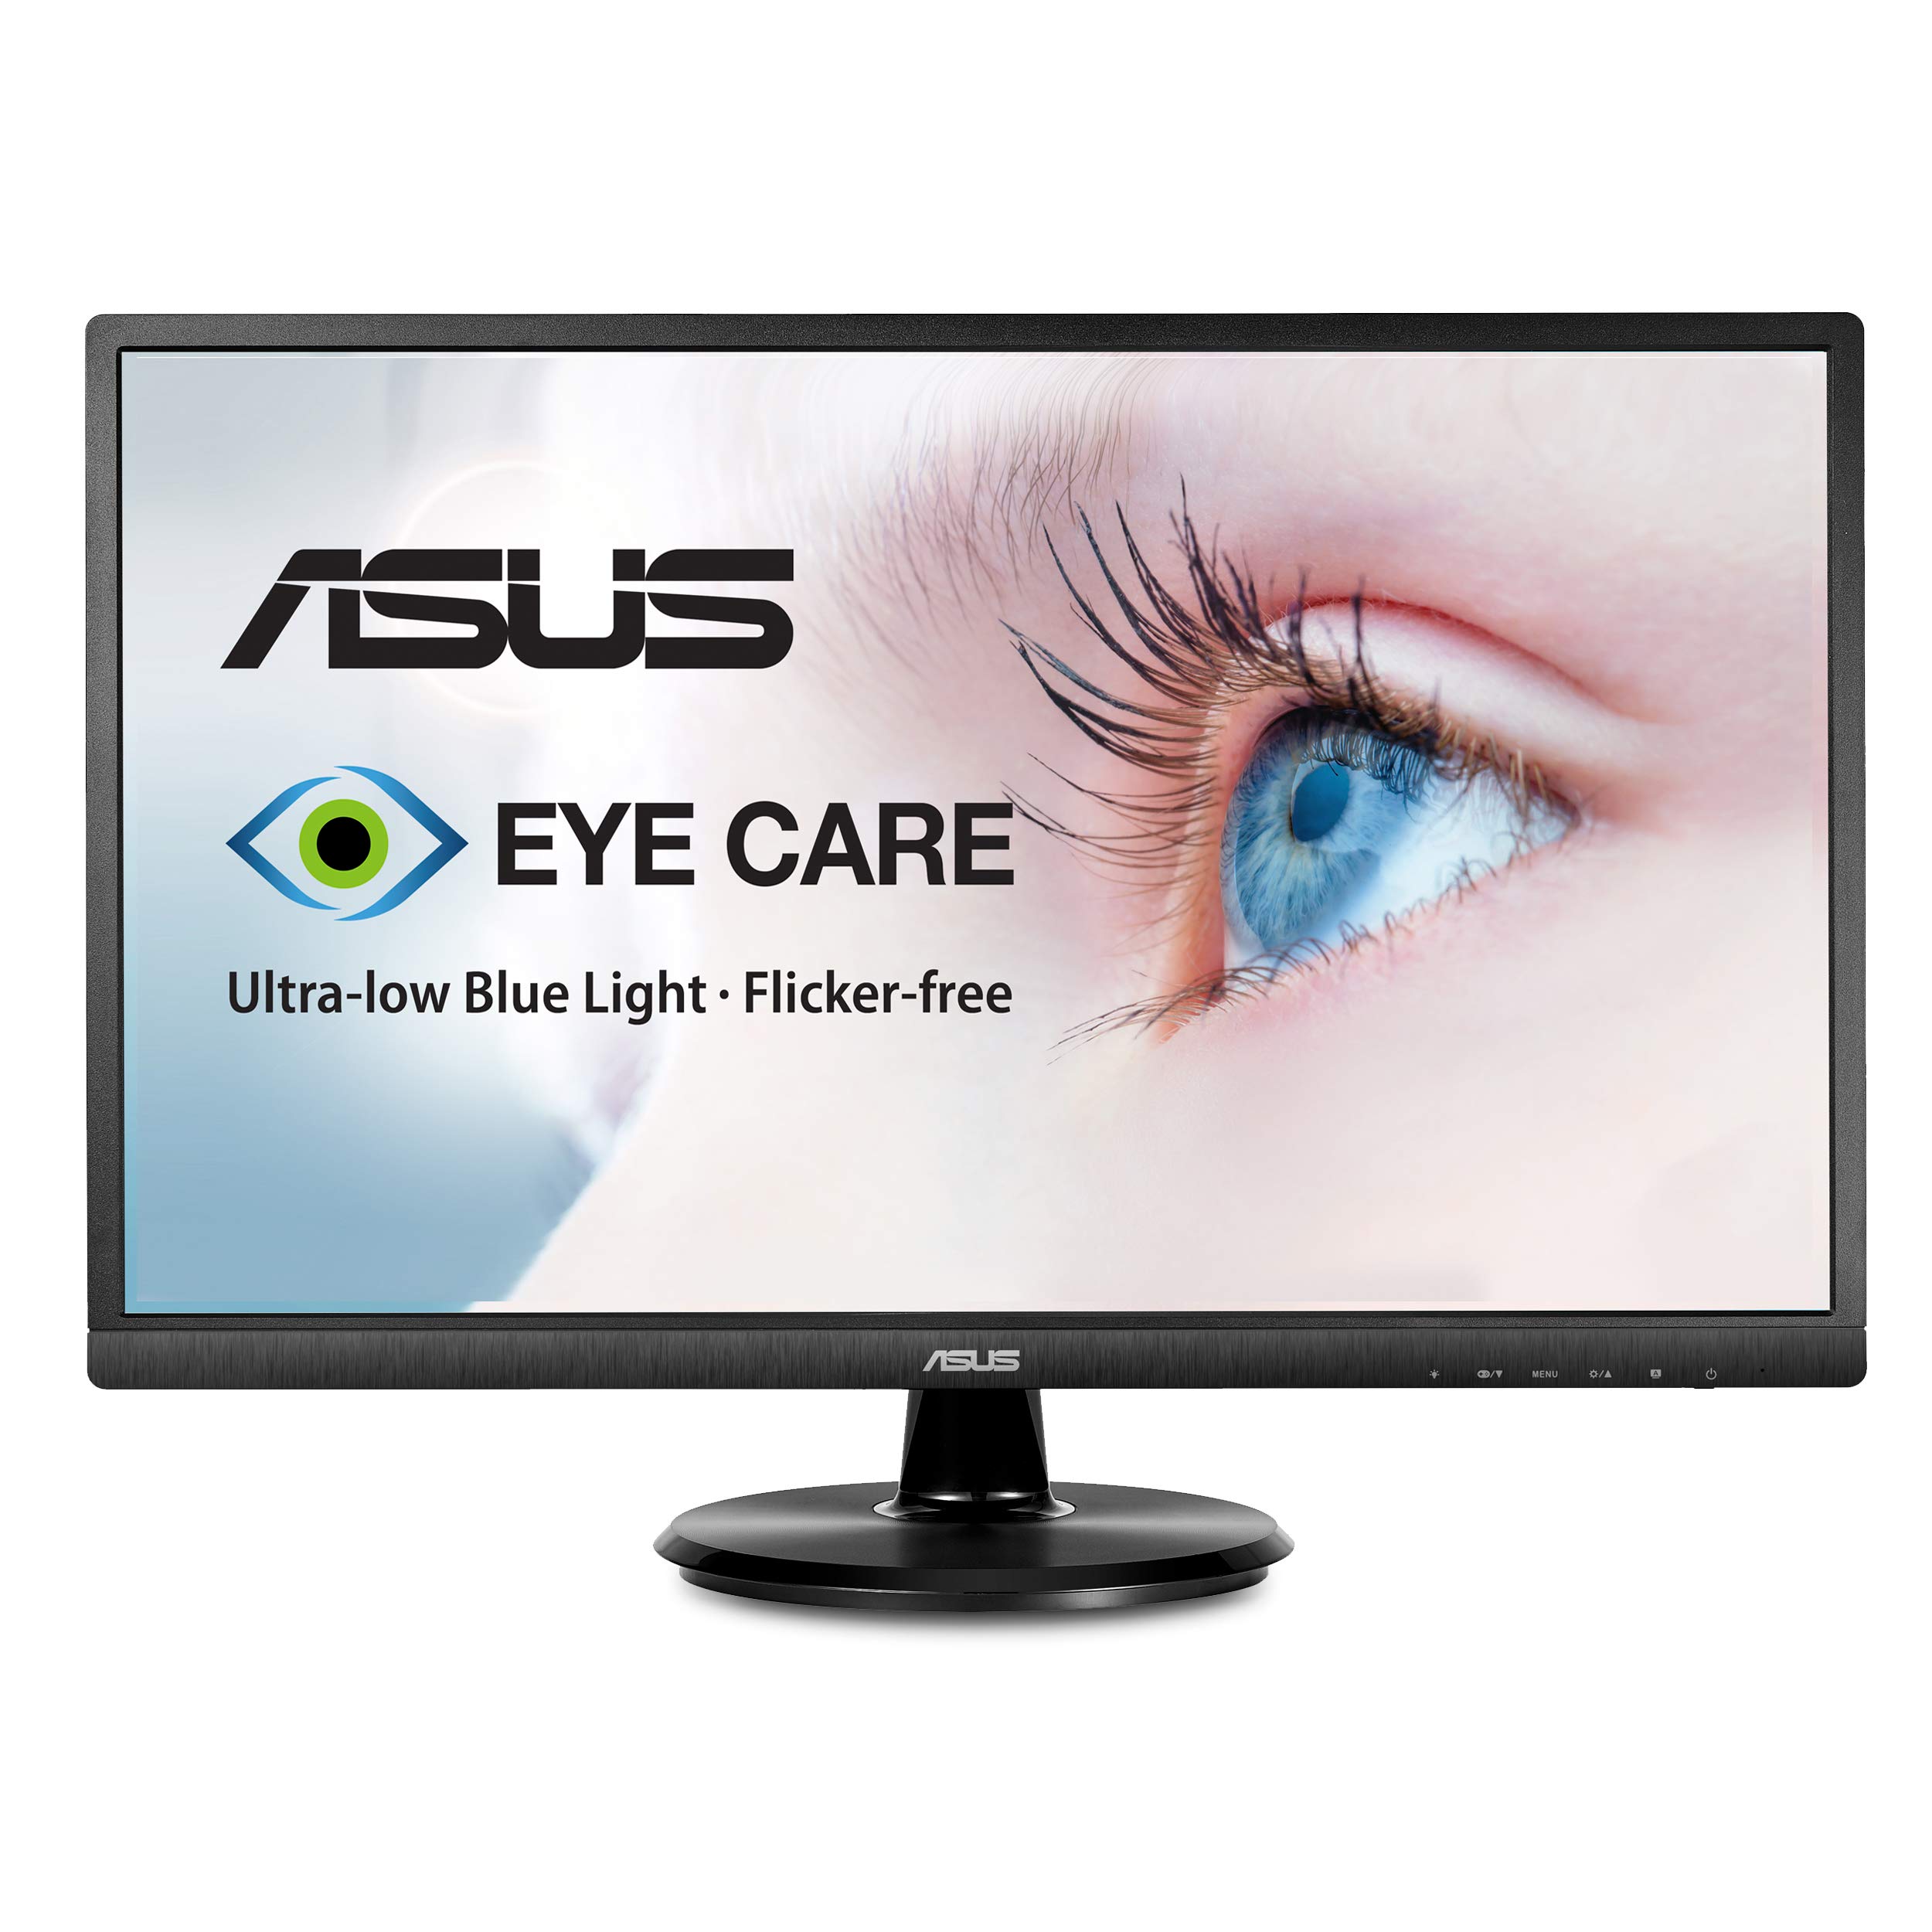 Asus VZ249HE 23.8” Full HD 1080p IPS Eye Care Monitor with HDMI and VGA